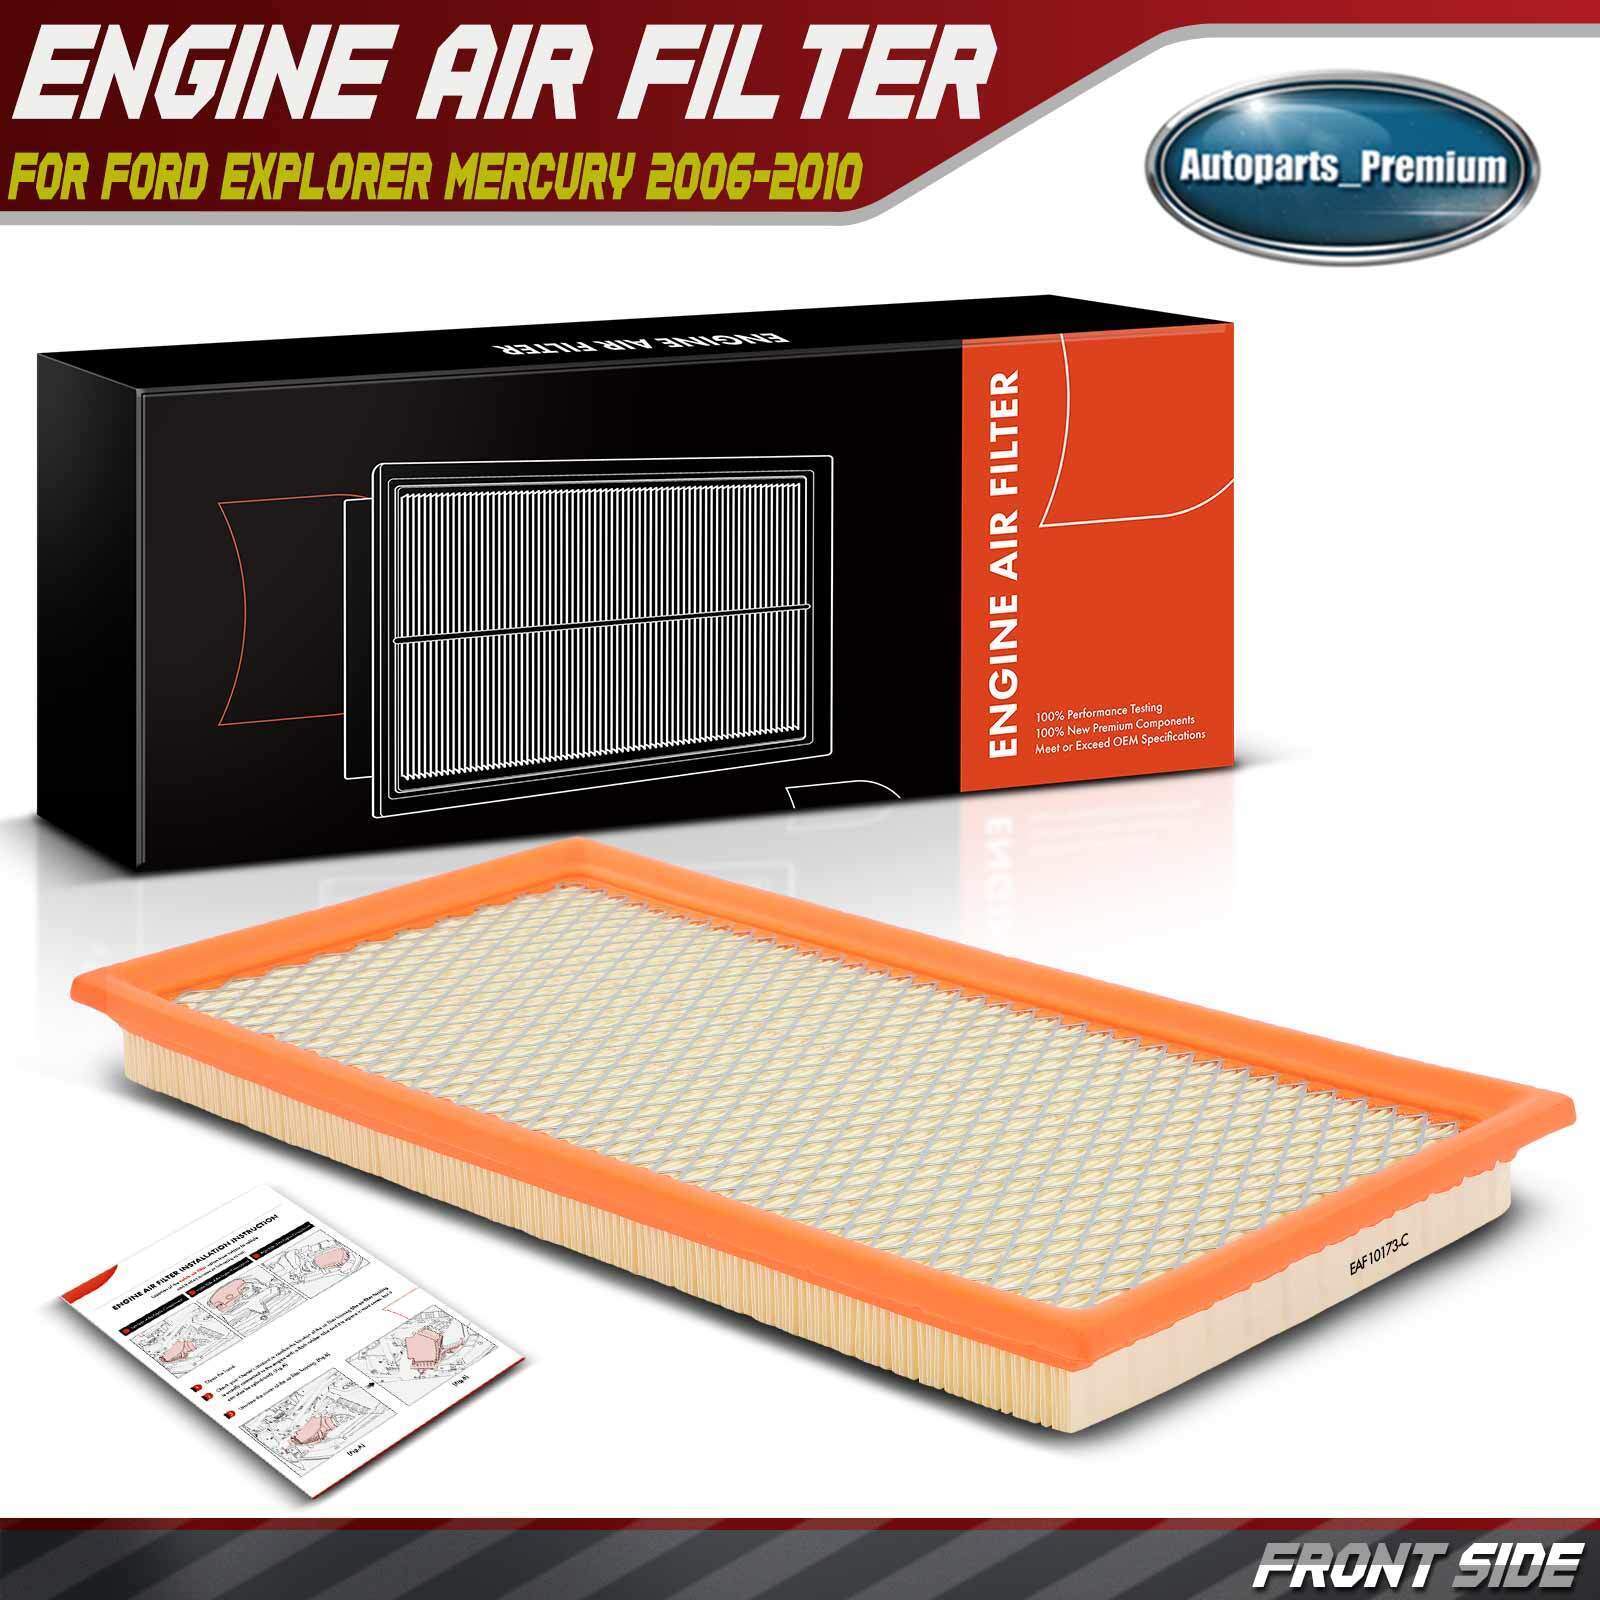 Engine Air Filter for Ford Explorer Mercury Mountaineer 2006 2007-2010 V8 4.6L